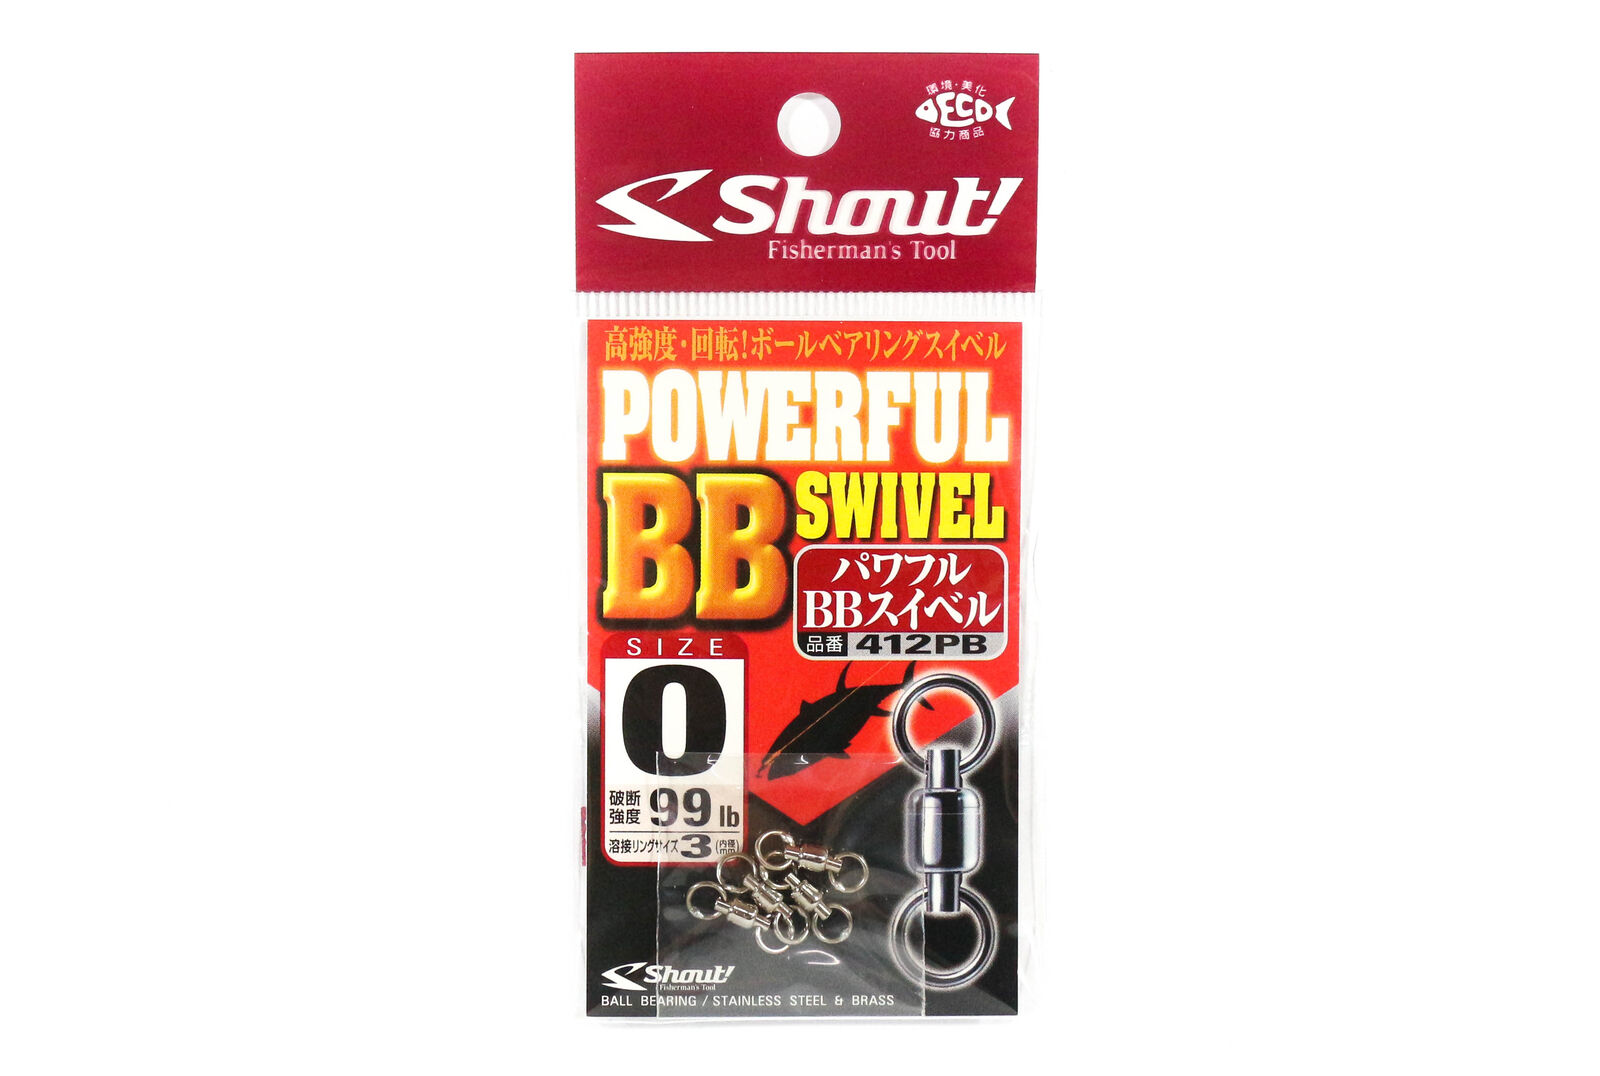 Shout Powerful BB Swivel #0 99LB - 0 - Mansfield Hunting & Fishing - Products to prepare for Corona Virus